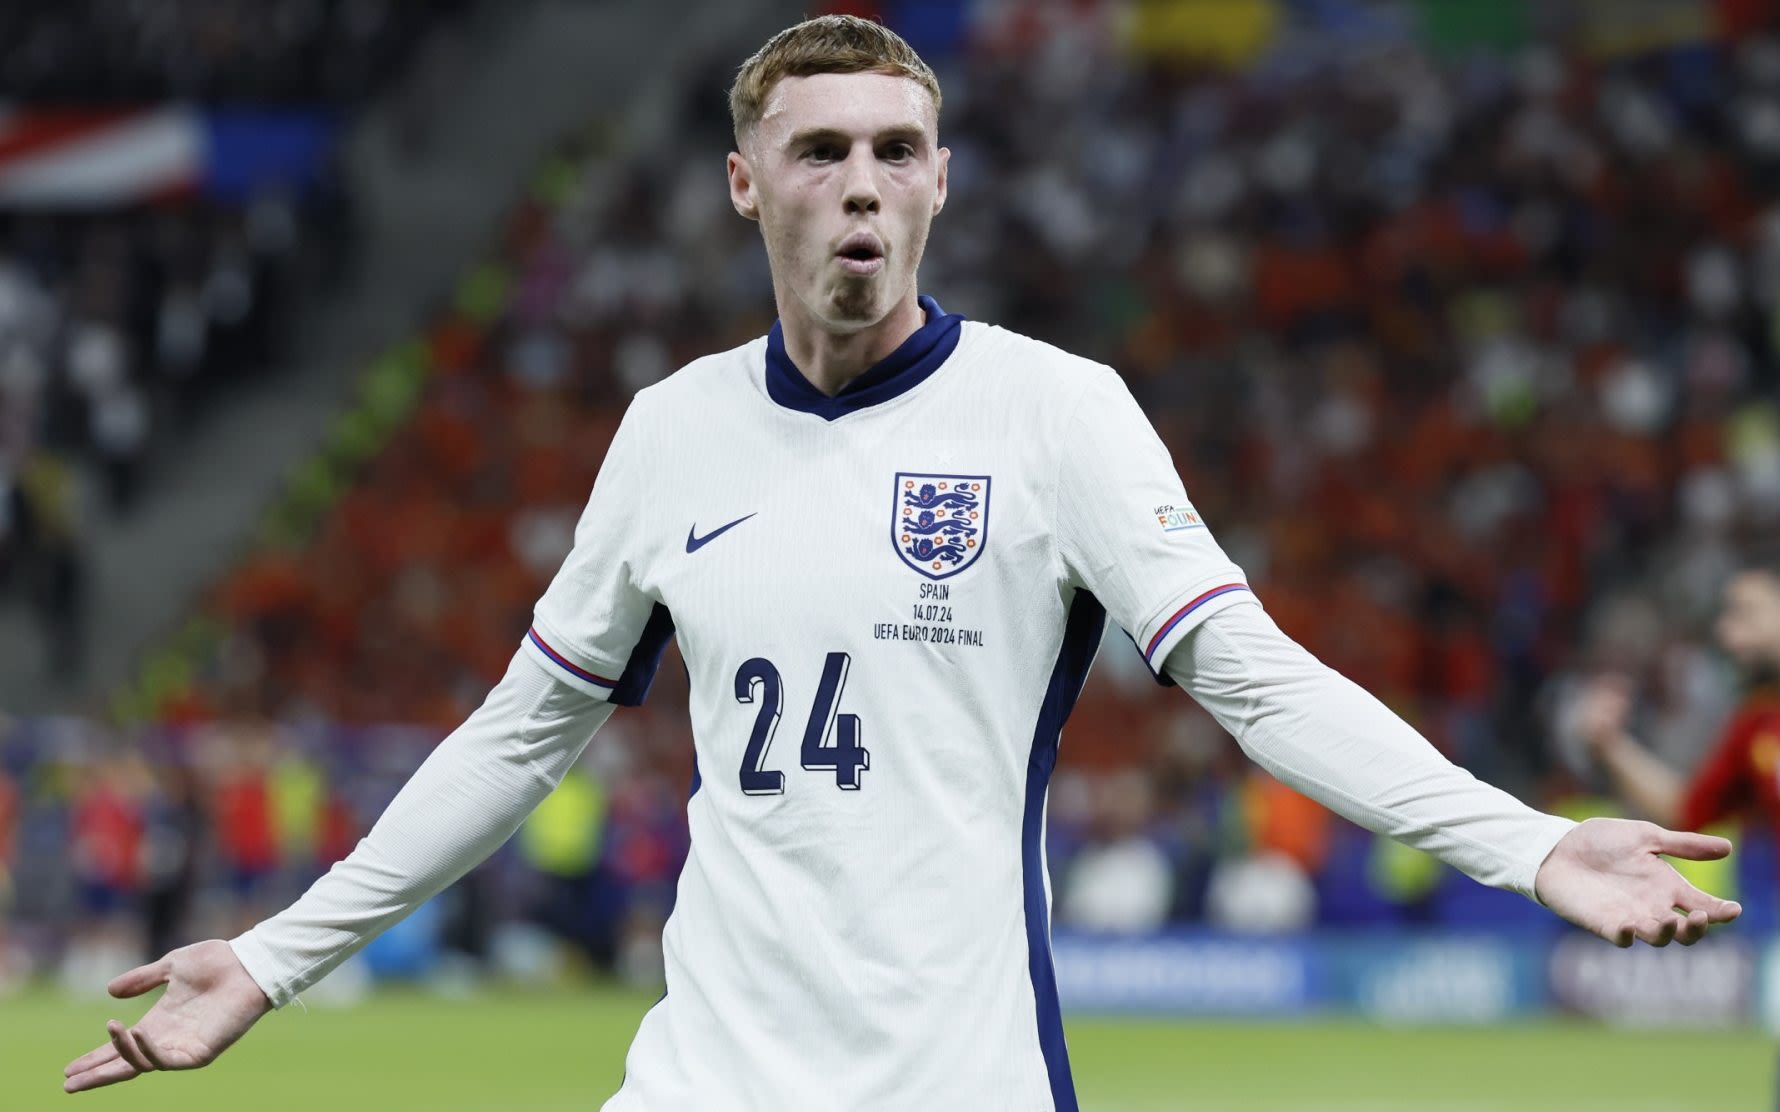 Too much Harry Kane and not enough Cole Palmer – Gareth Southgate’s selection calls dissected